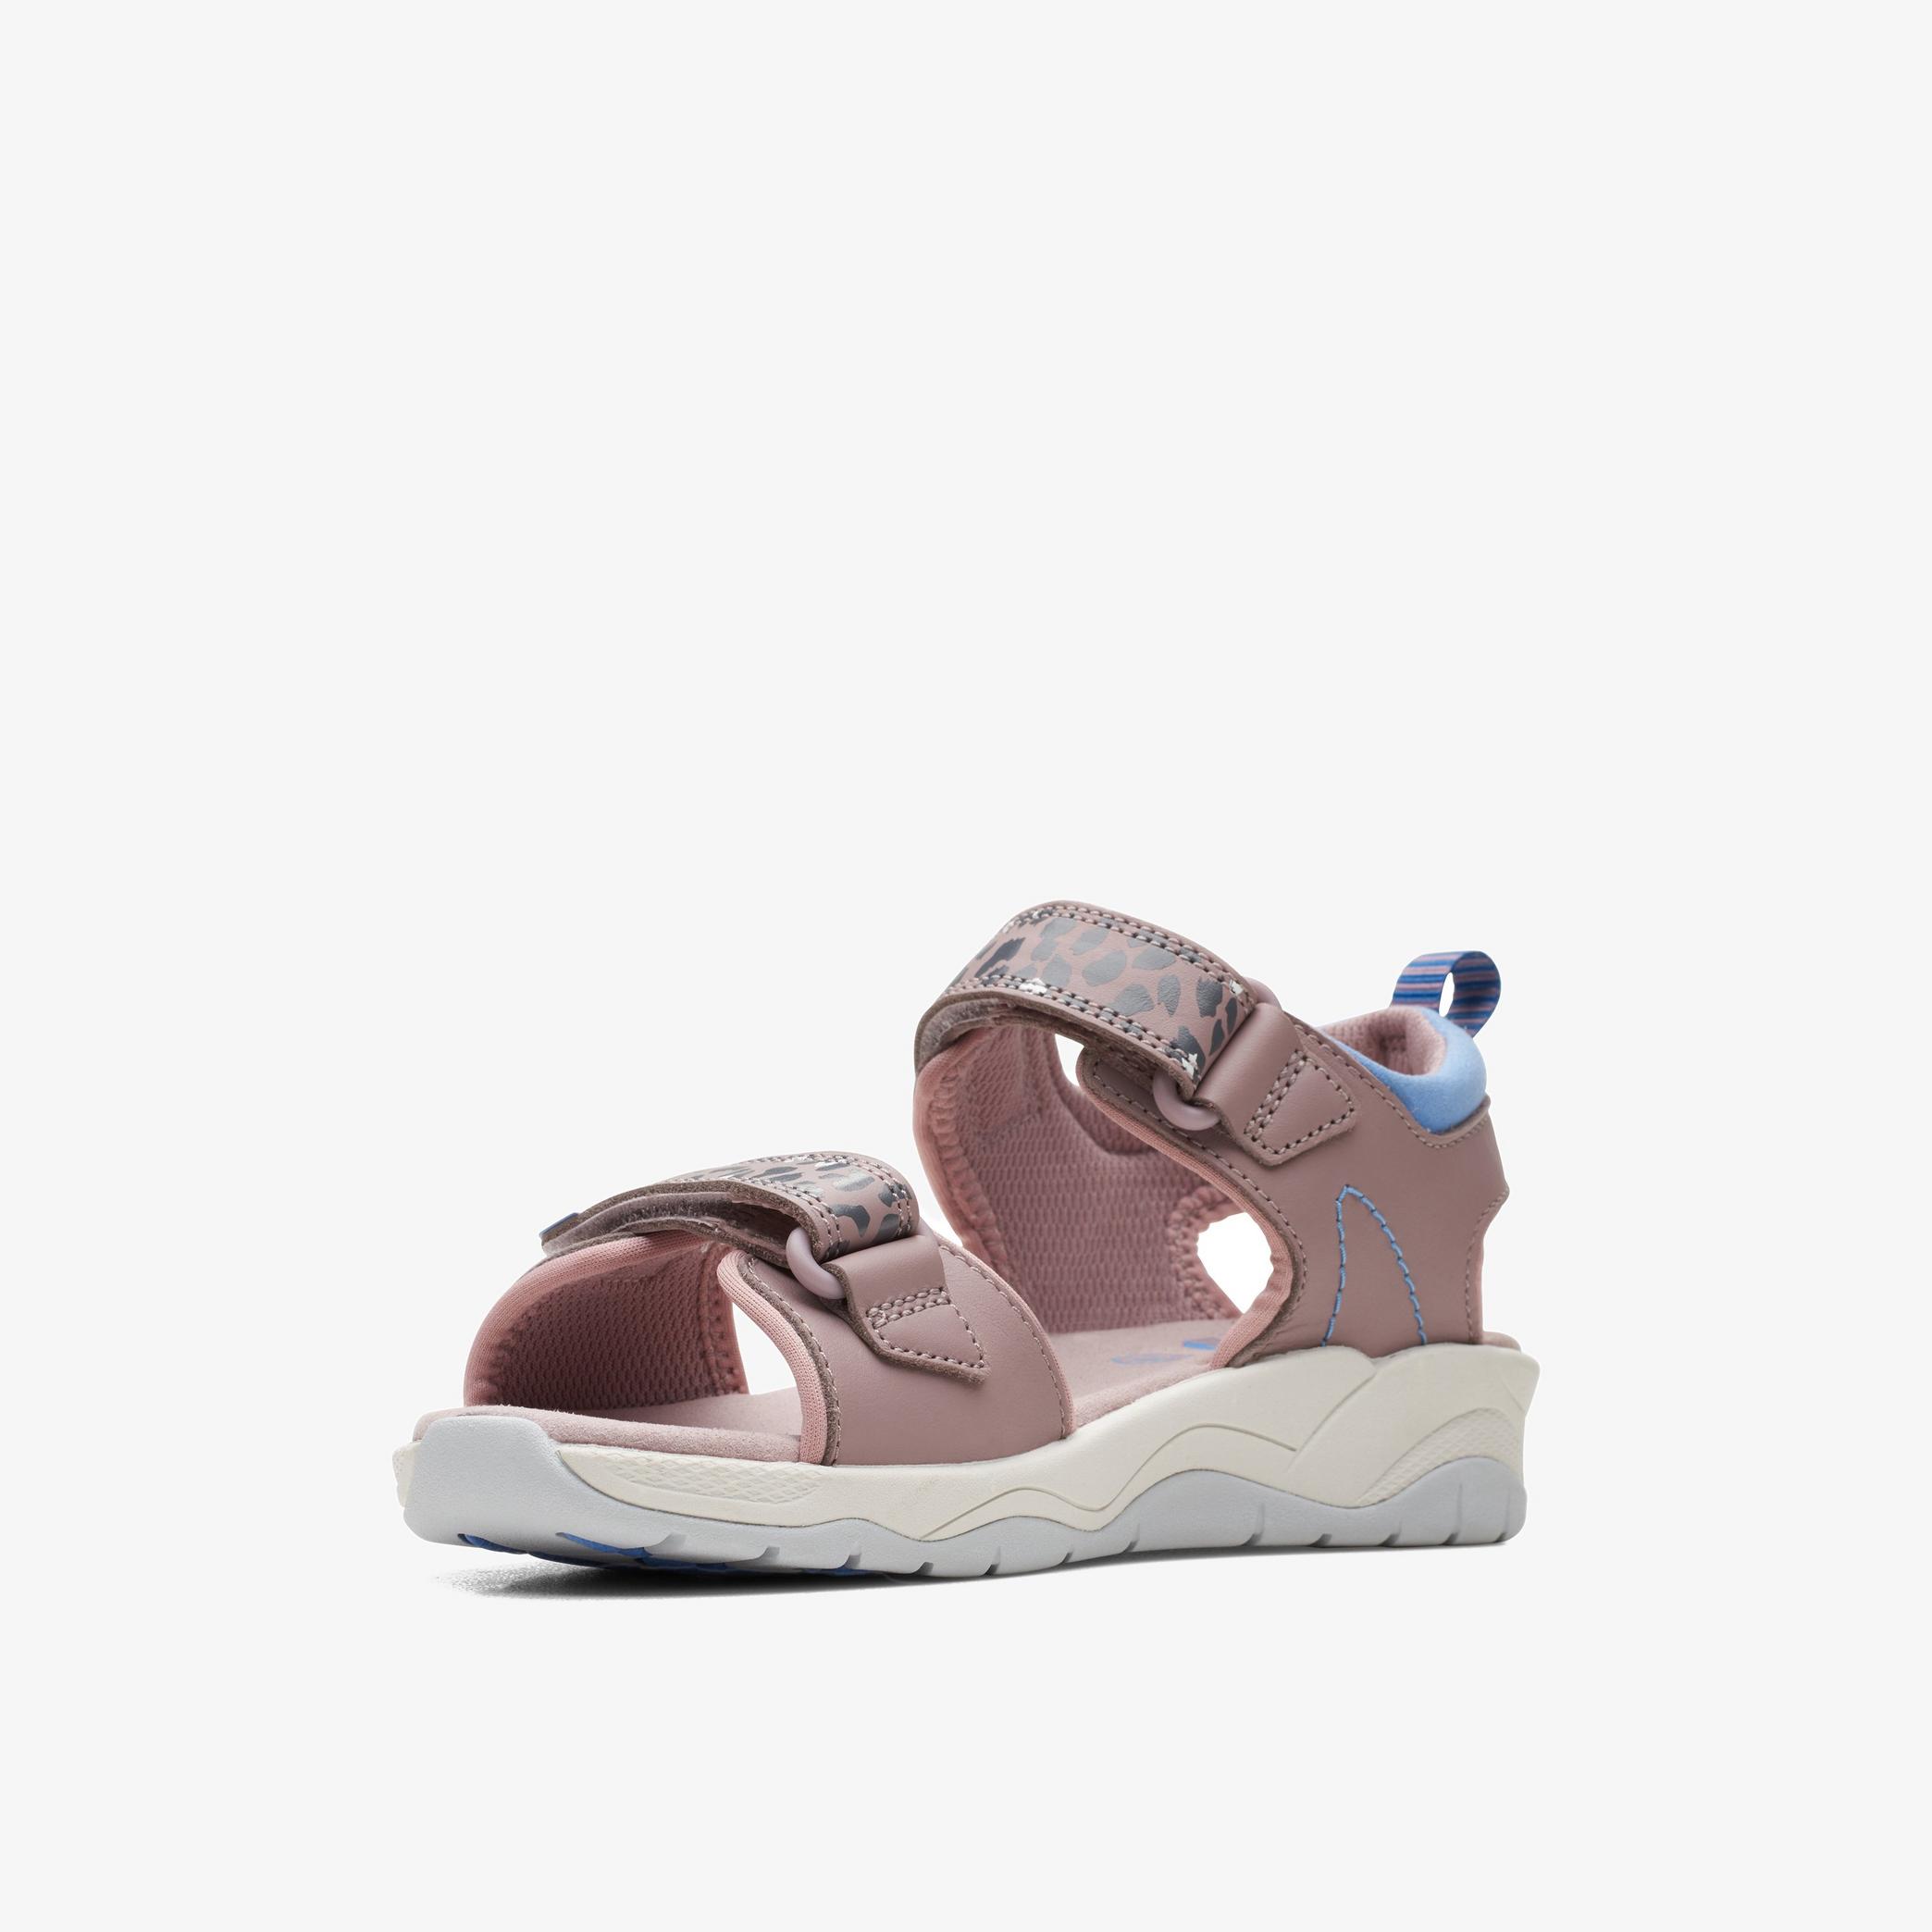 GIRLS Clowder Print Youth Grey/Pink Flat Sandals | Clarks Outlet